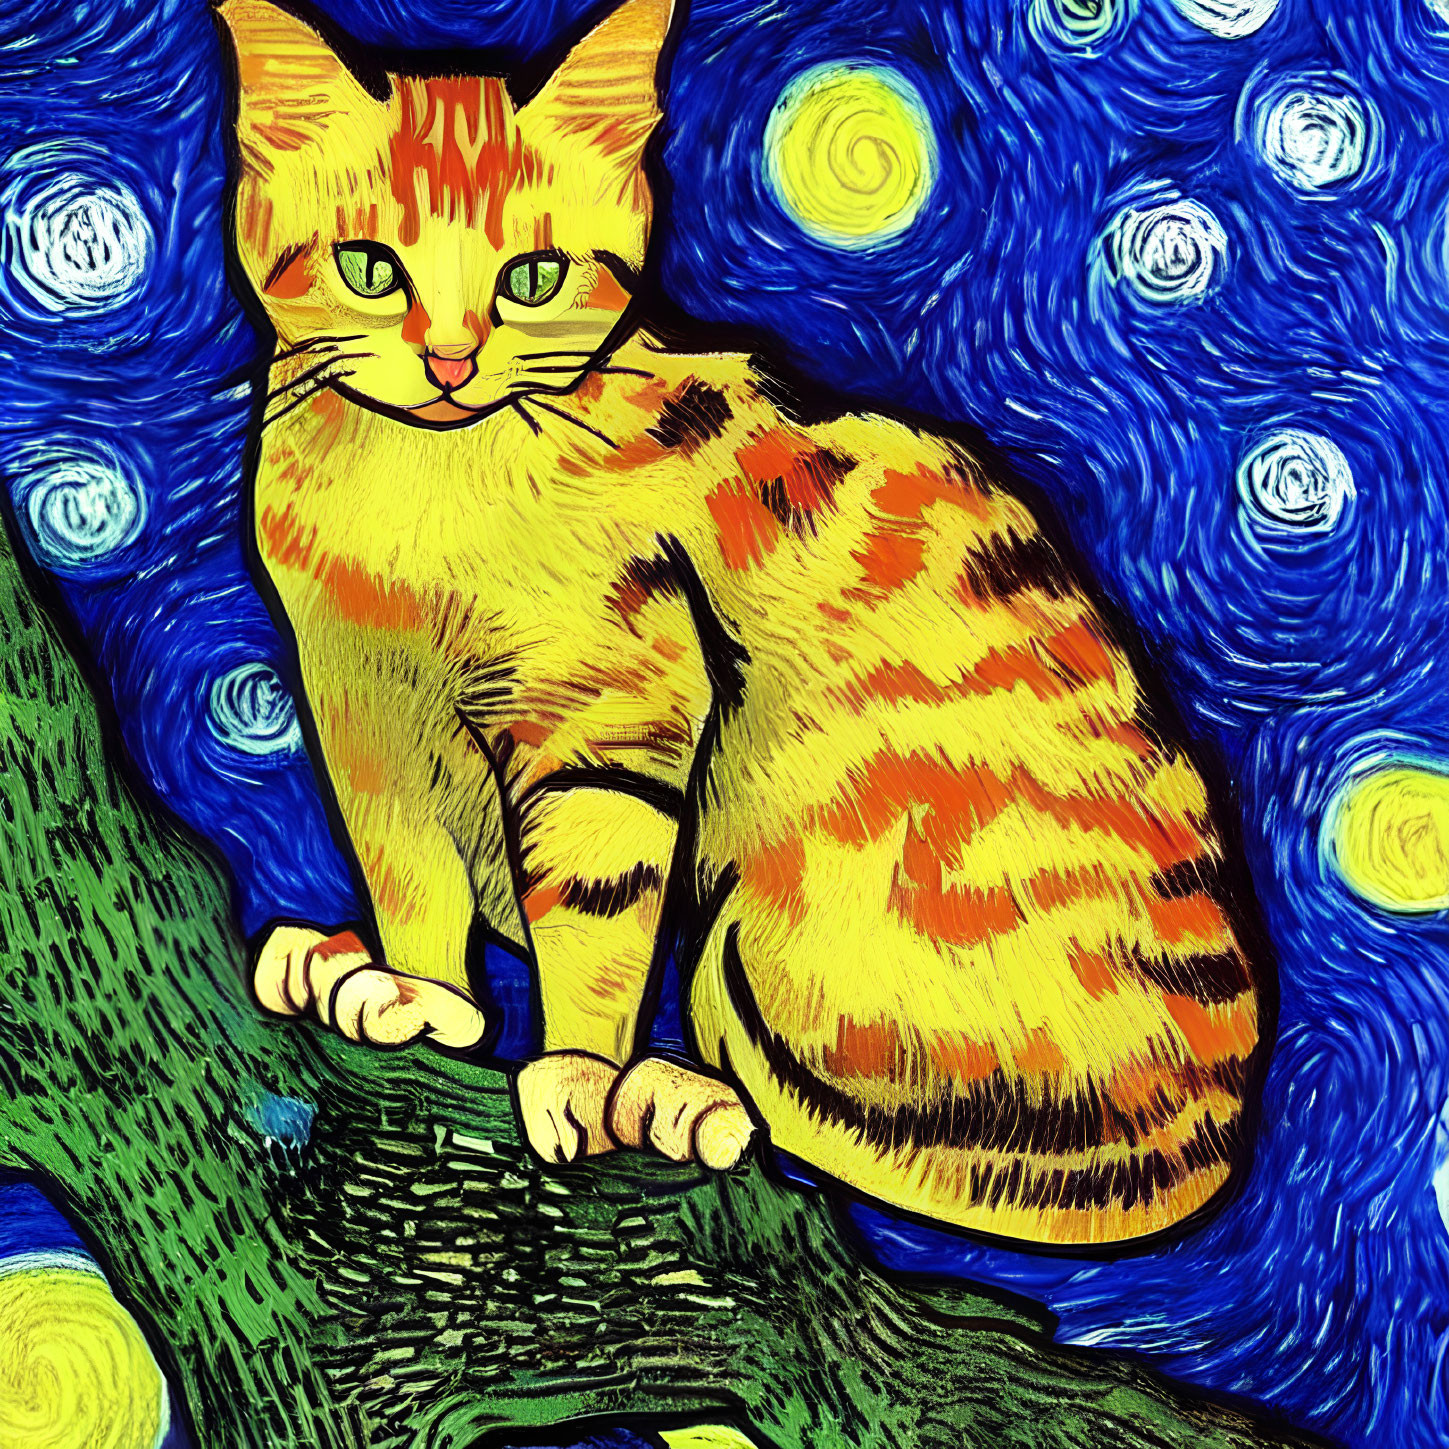 Orange Tabby Cat with Green Eyes on Van Gogh-Inspired Background